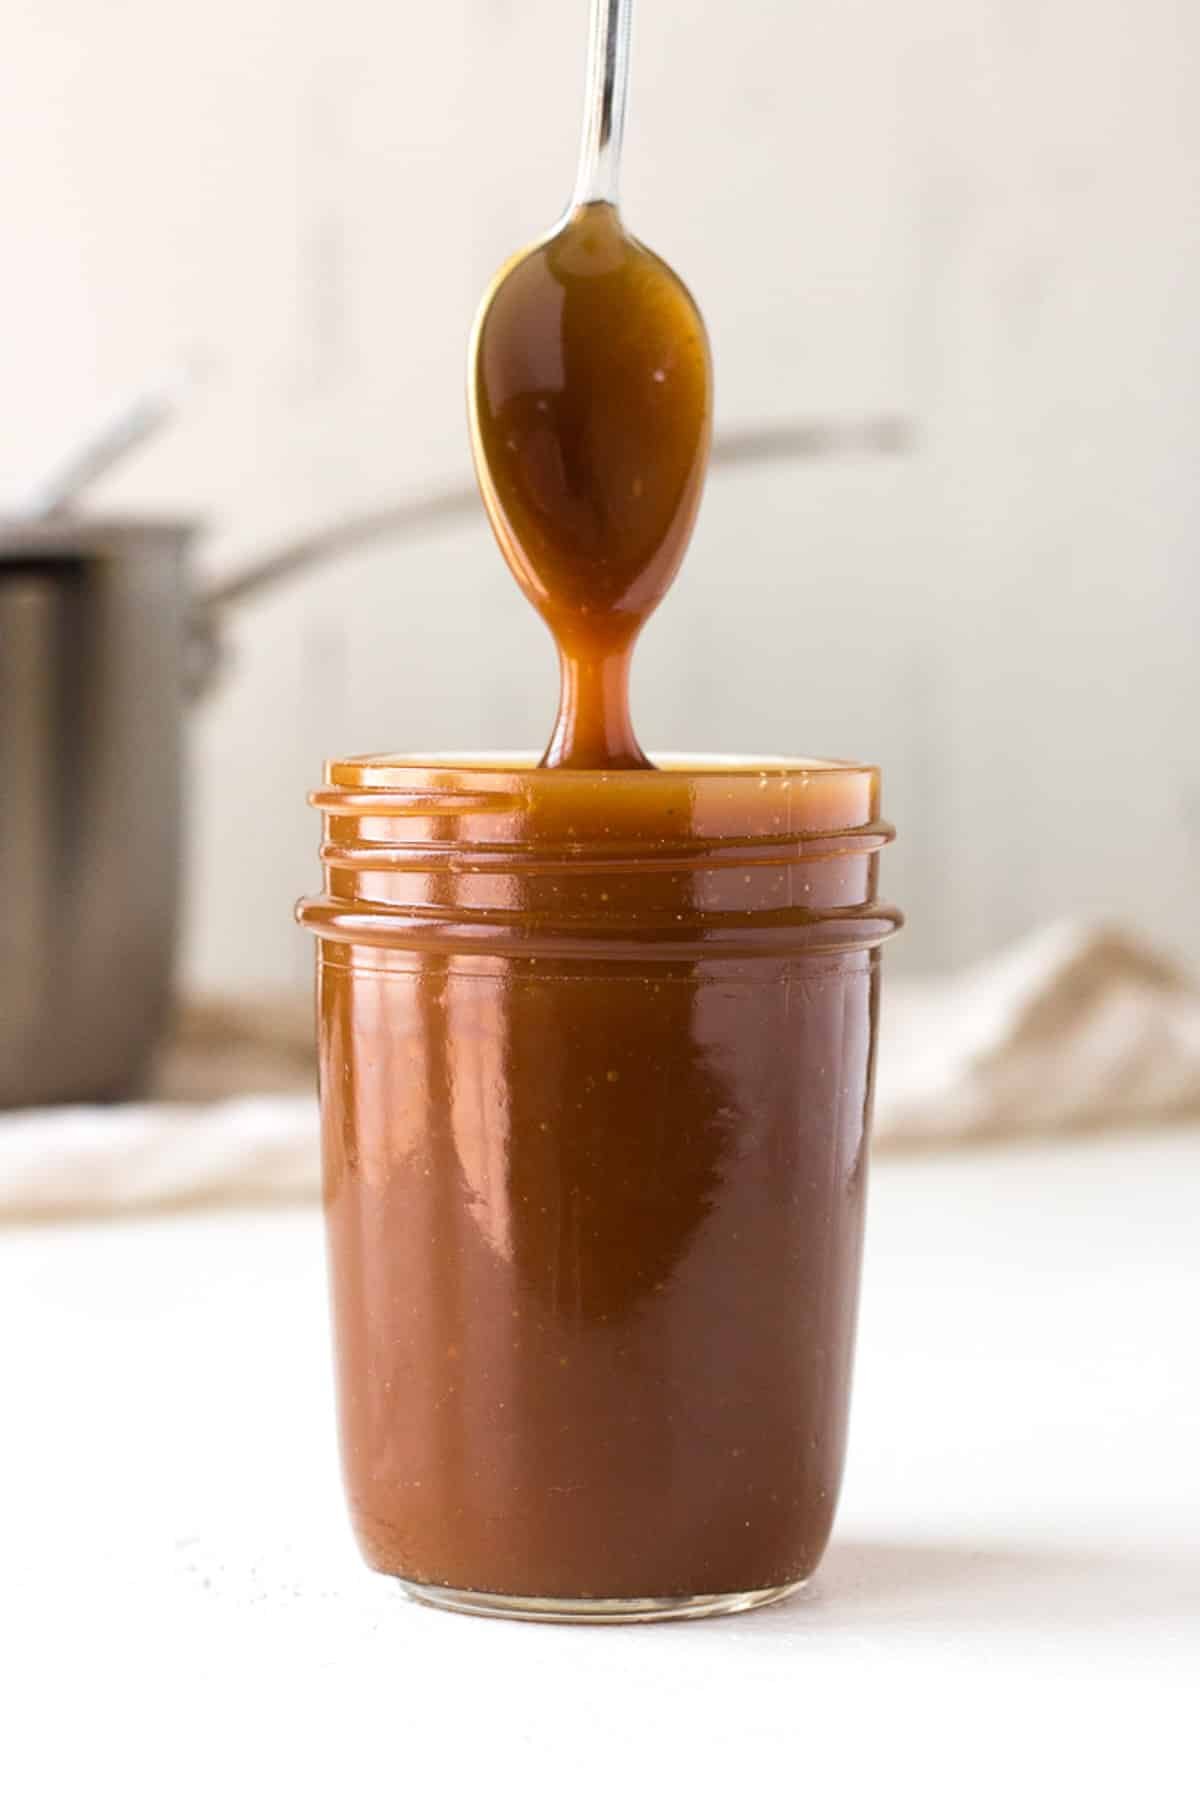 a spoon being held over a jar of caramel sauce, with sauce dripping from the spoon.